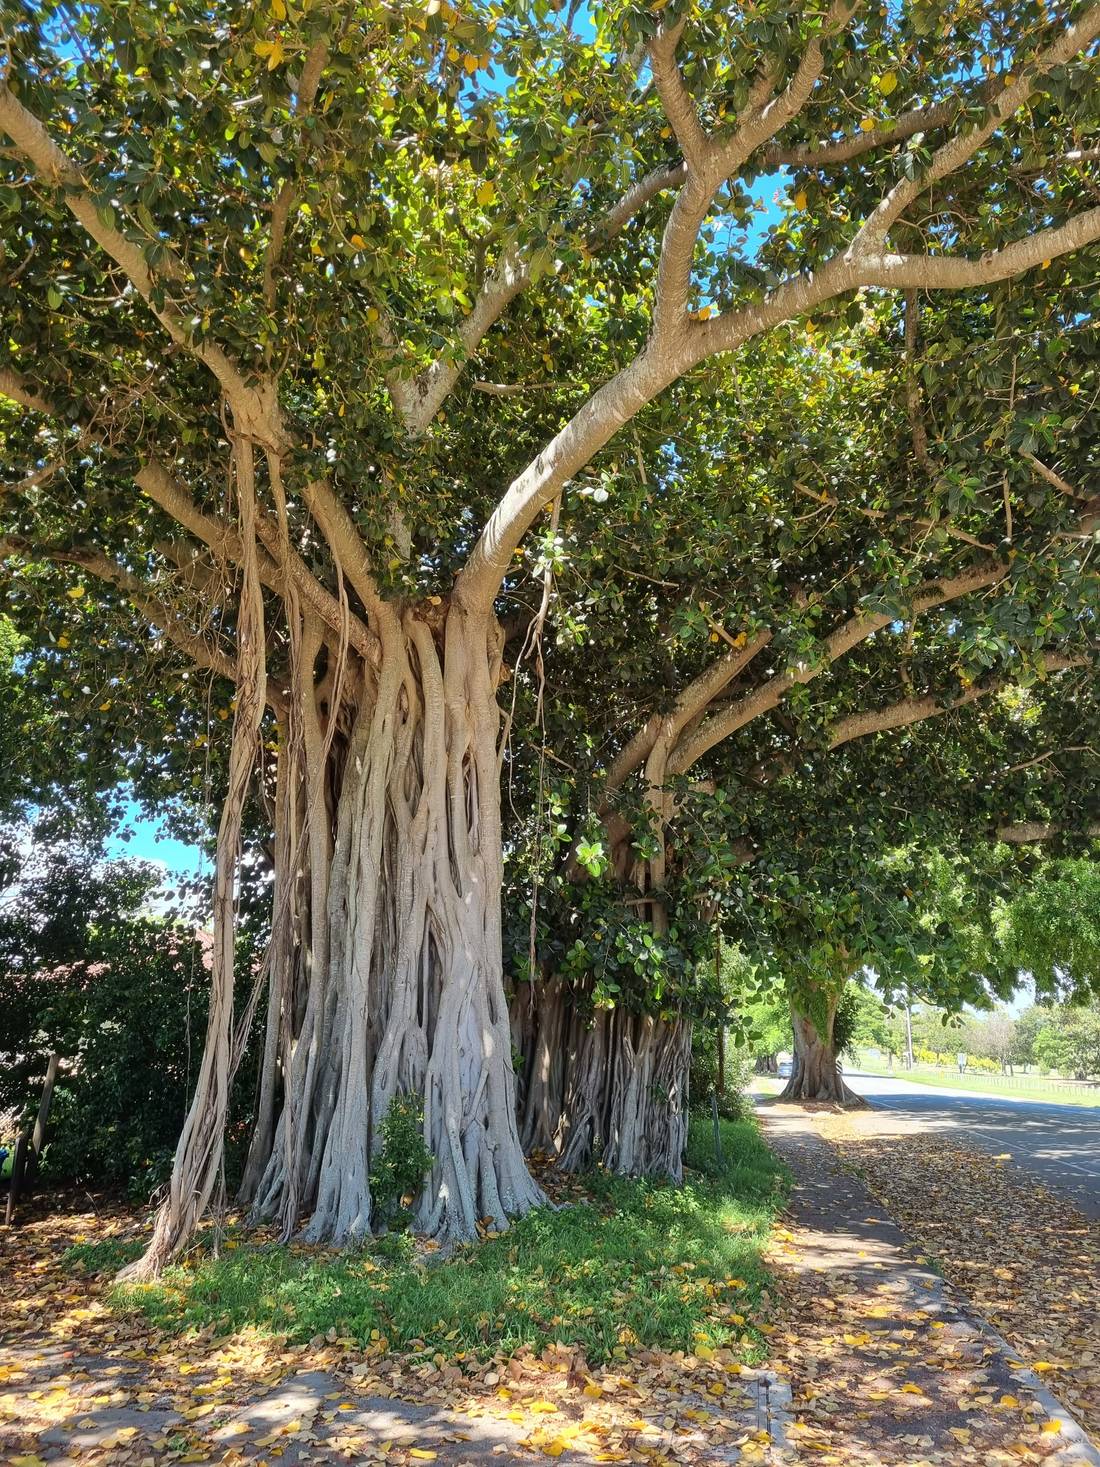 Curtain Fig Tree. Being an older area there are some magnificent large older trees.